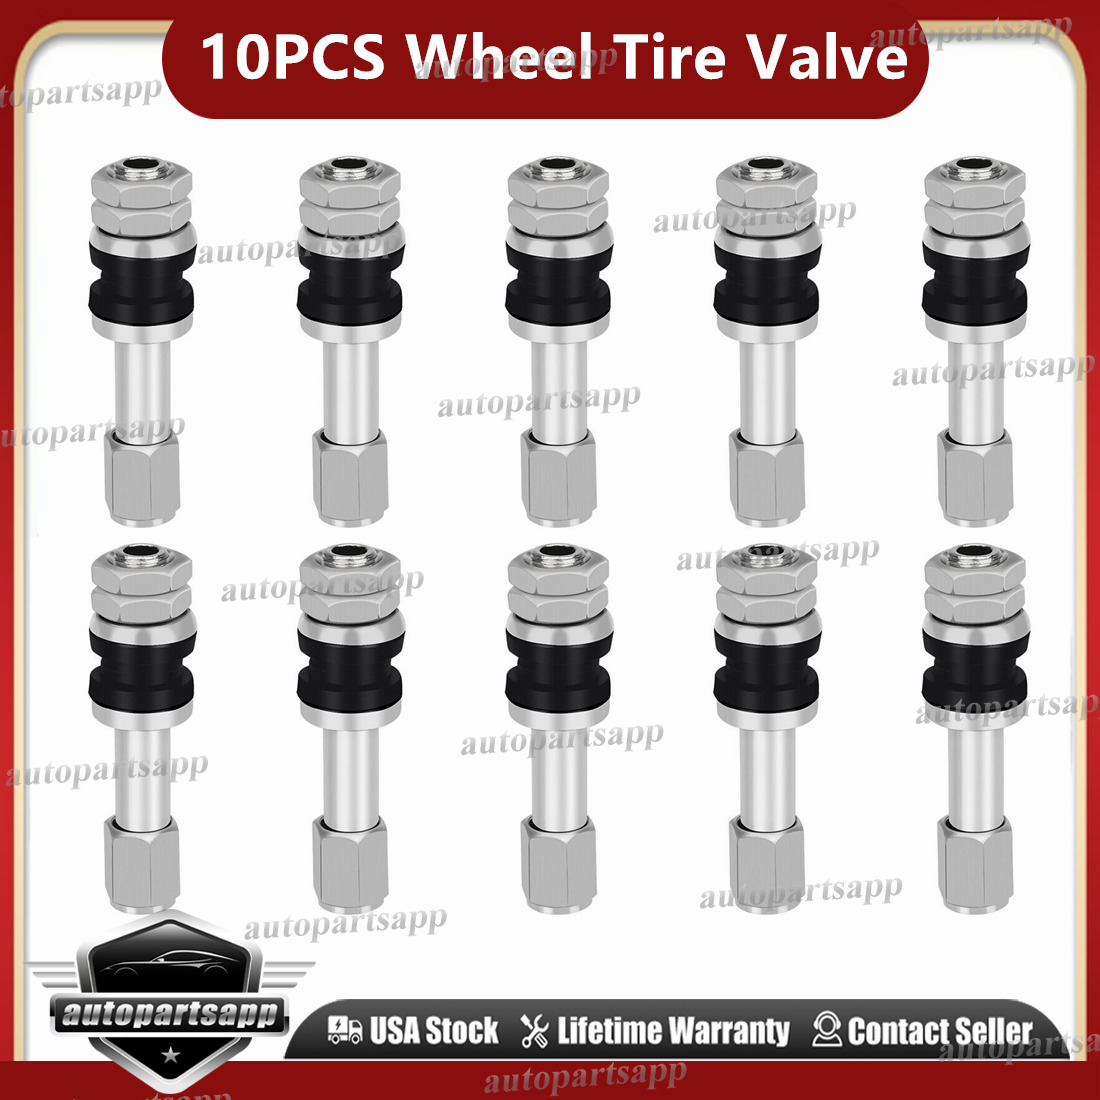 10 Stainless Steel Wheel Tire Valve Stems Hight Pressure Bolt in with Caps NEW